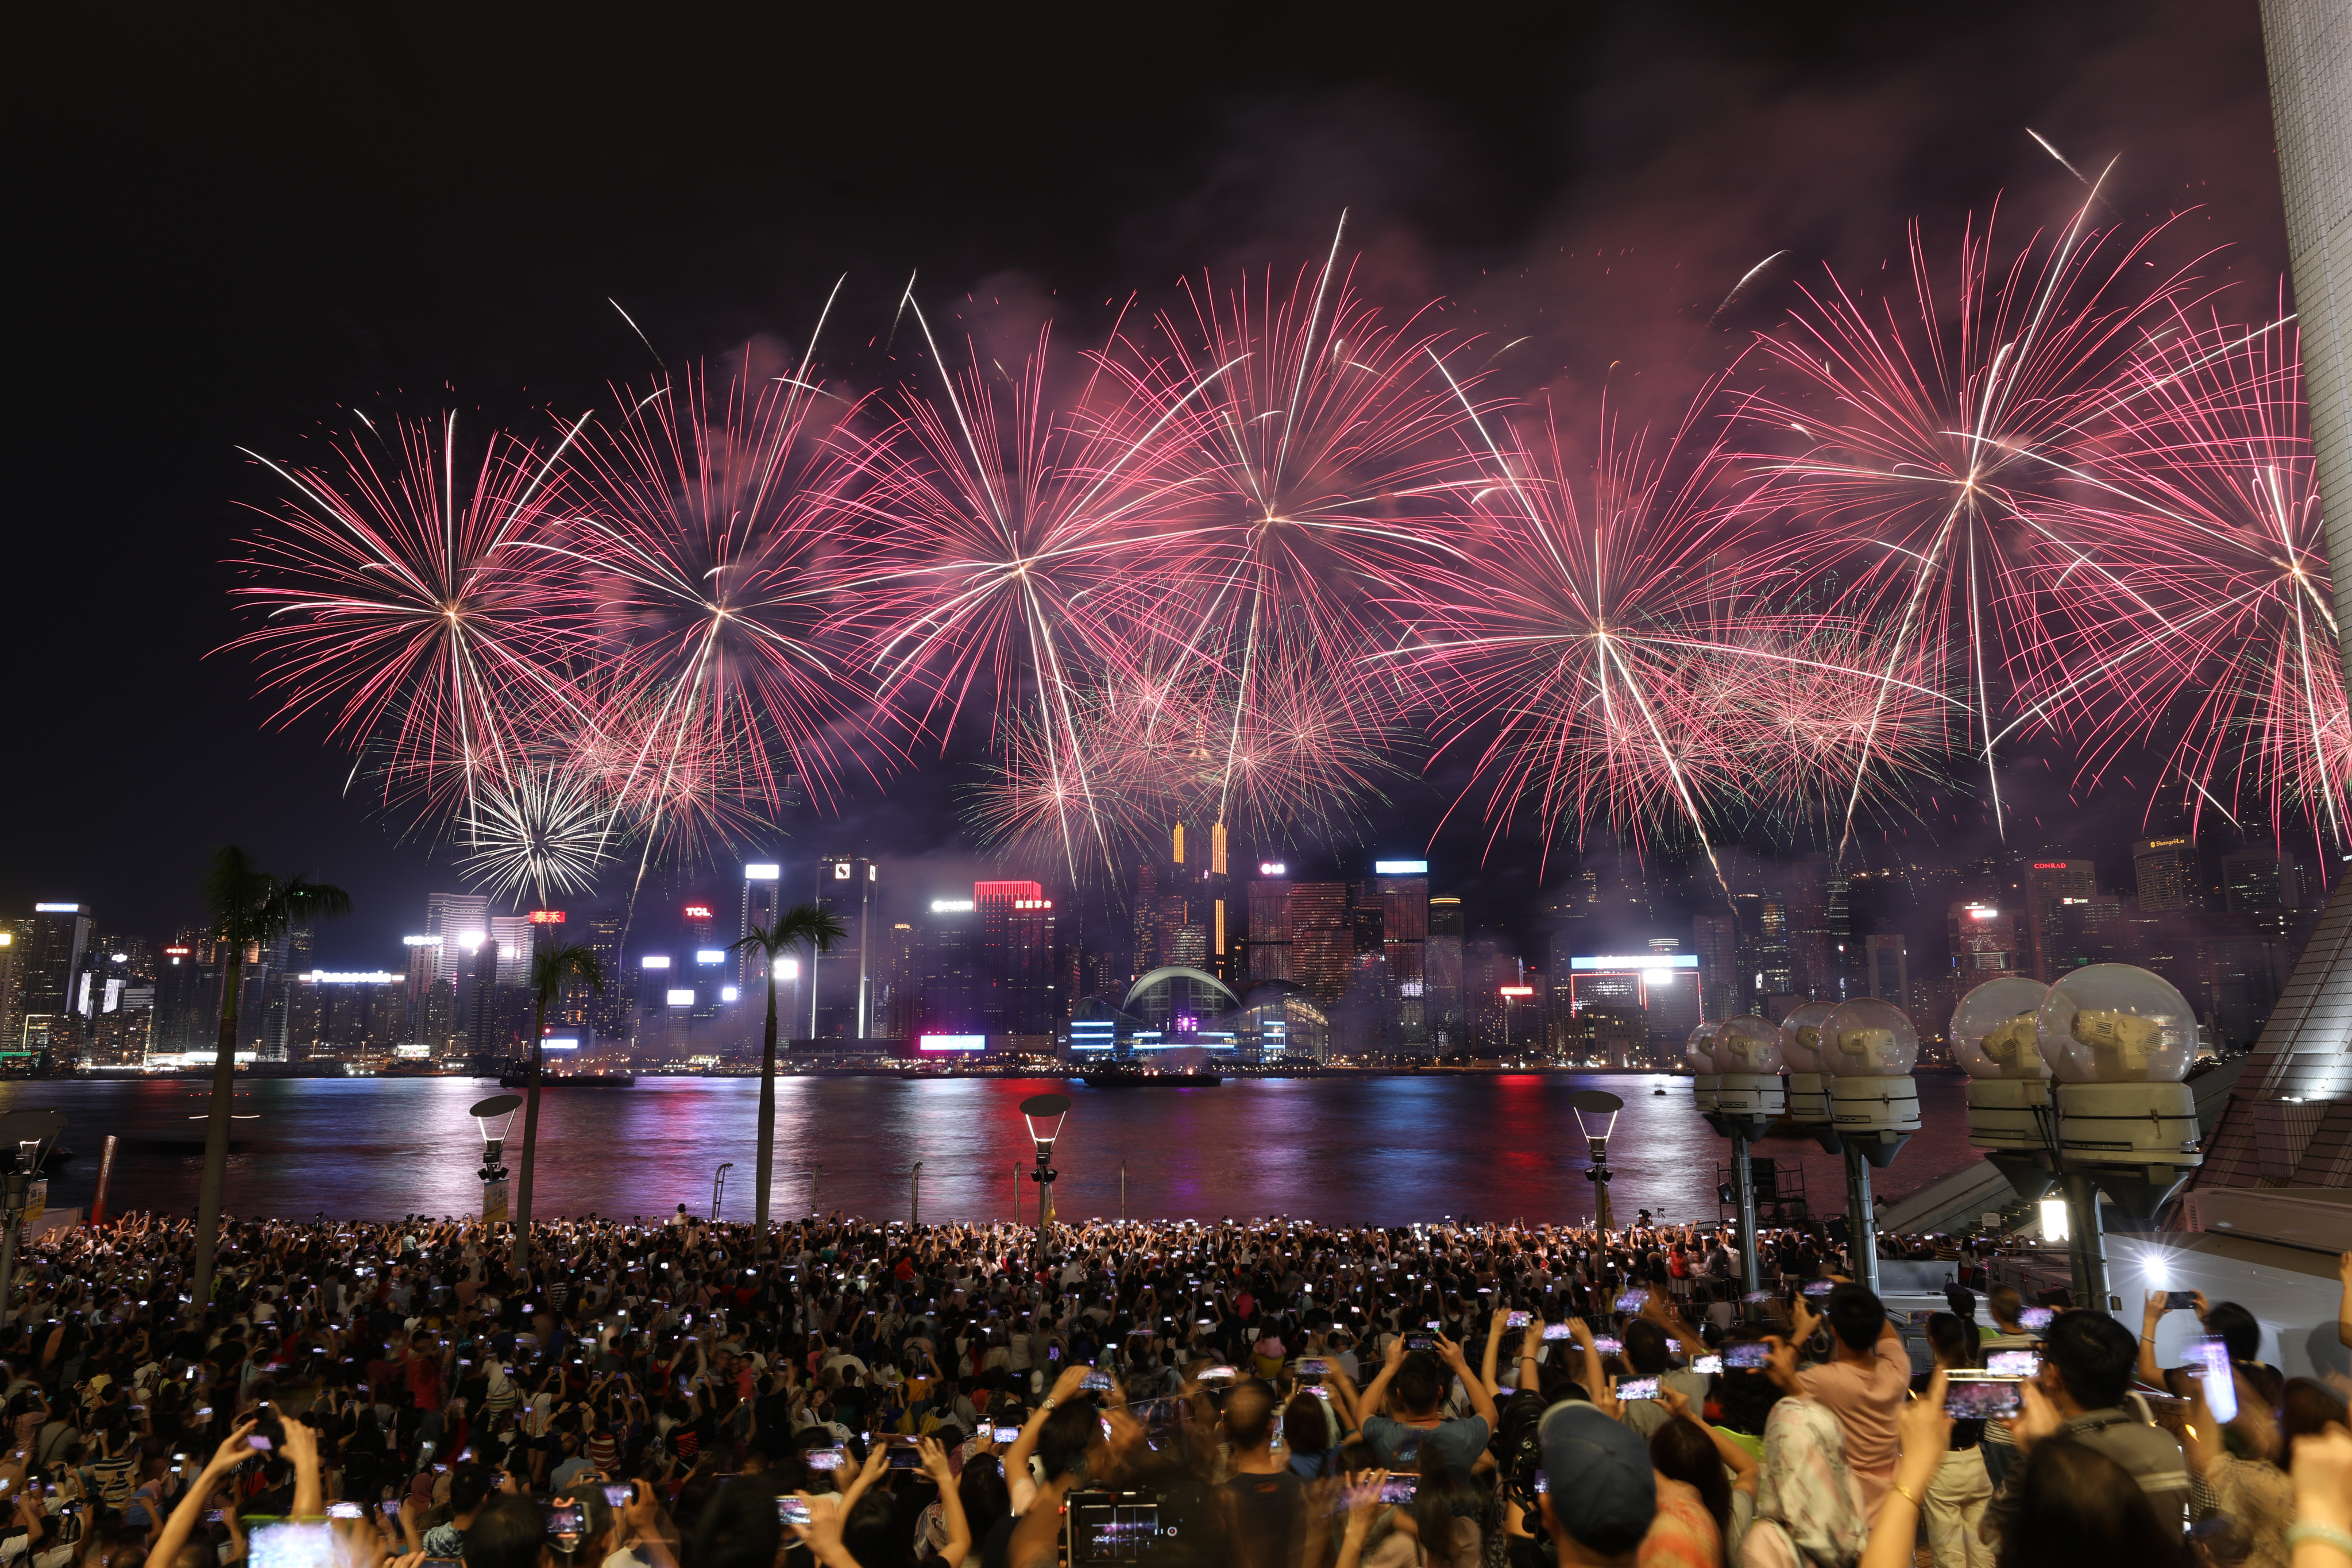 Hong Kong will celebrate the Mid-Autumn and National Day in grand style for the first time since the pandemic. Photo: Dickson Lee